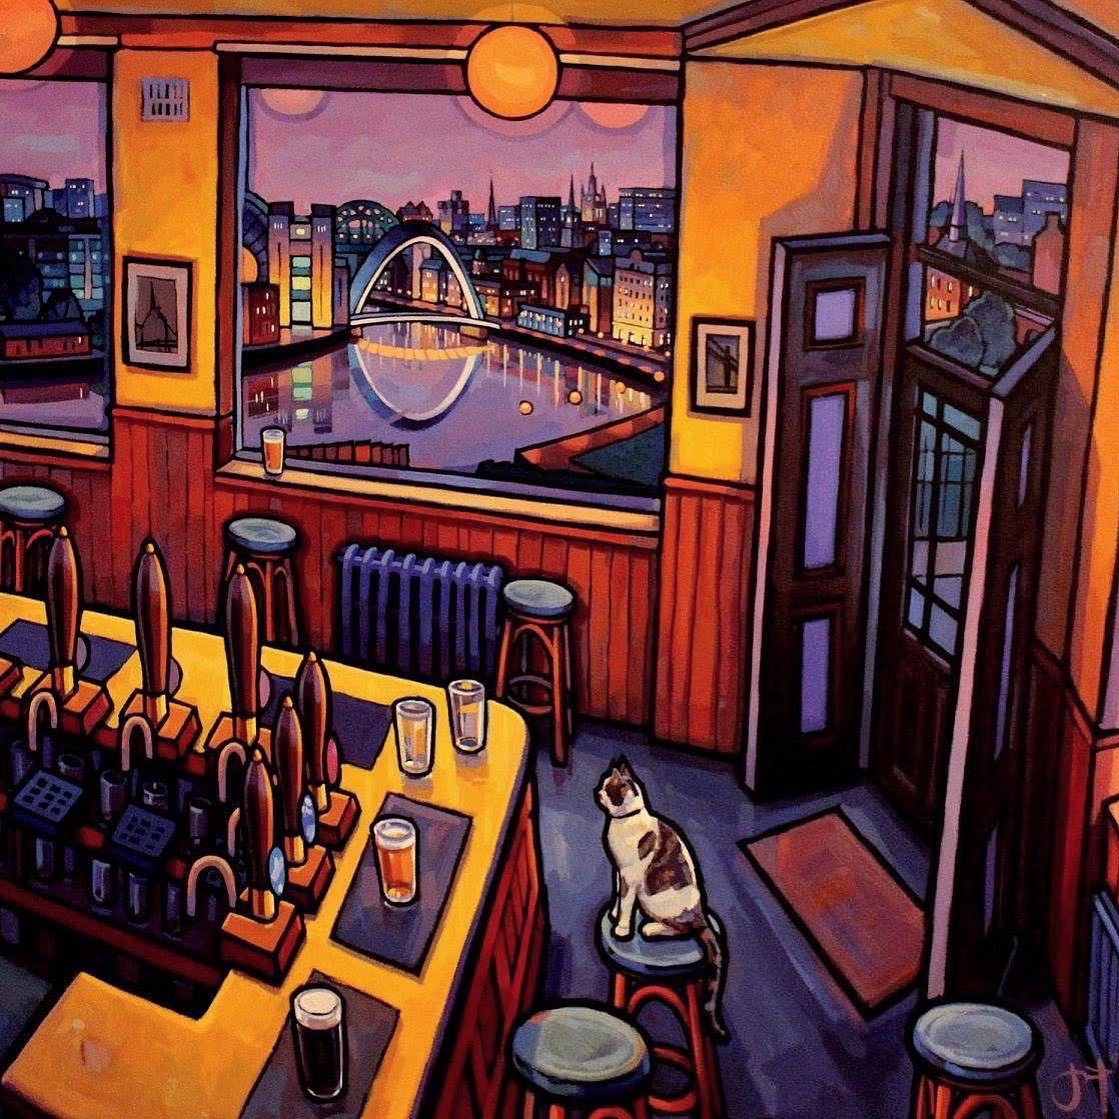 Free Trade at Night - Jim Edwards
Painted @TheFreeTradeInn many times, my muse for a little while; managed to wean myself off, for now. This one’s probably one of my favourites, with the late CraigDavid pubcat on the bar stool.
Ltd edition print available:
jimedwardspaintings.com/store/p123/Fre…